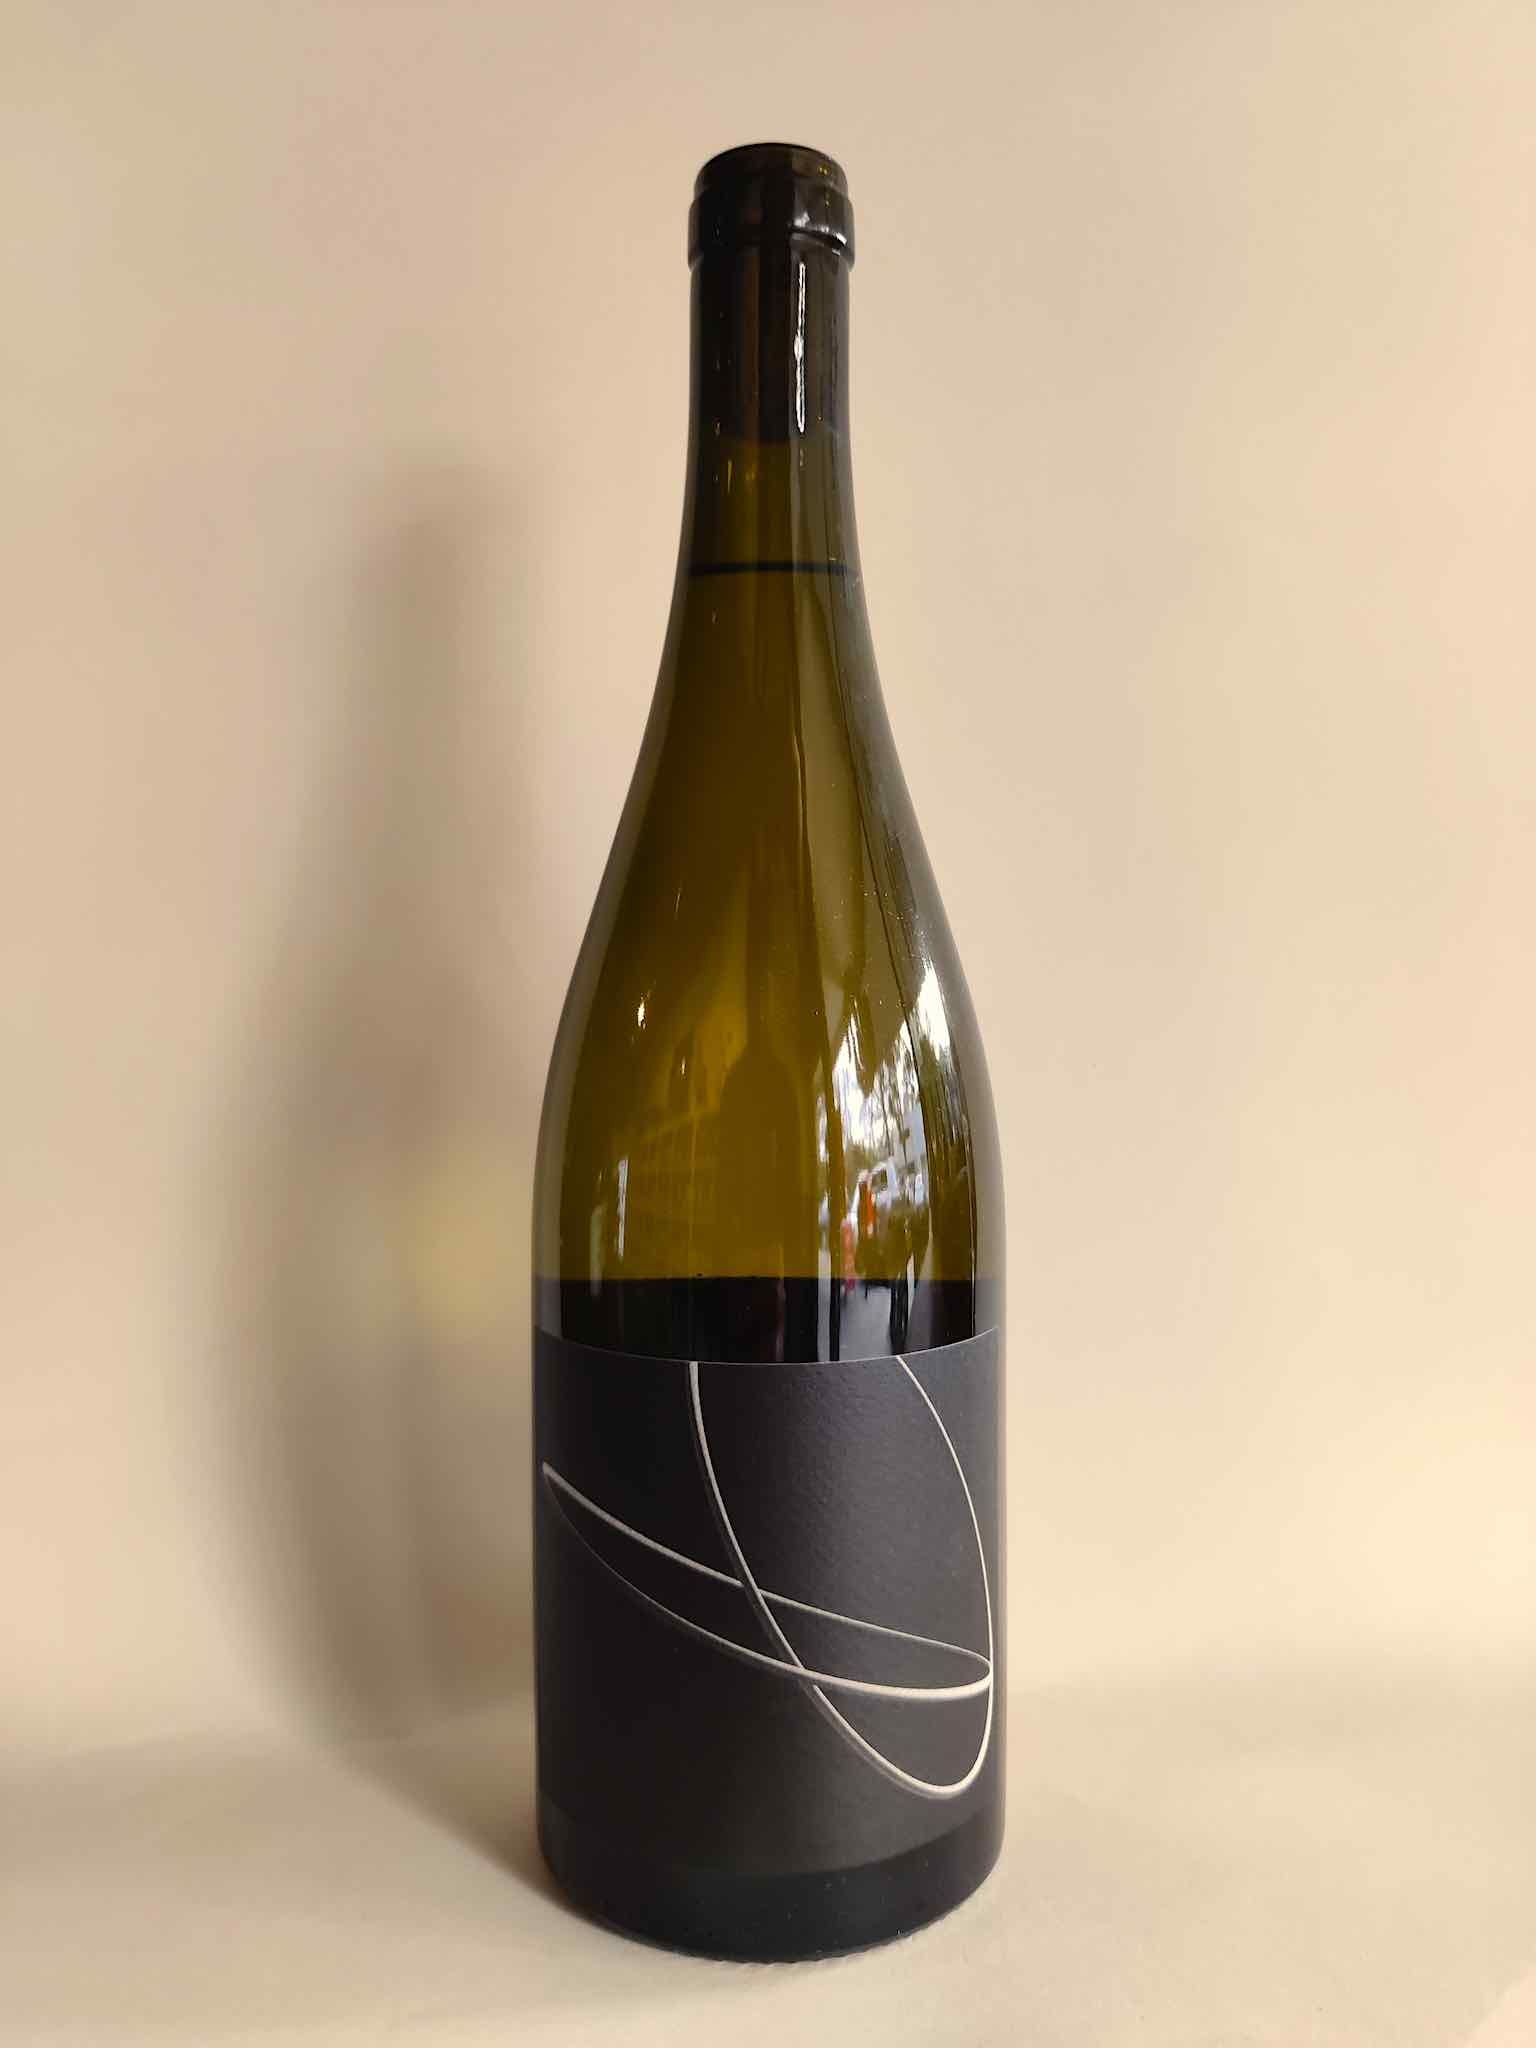 A bottle of Trapeze Chardonnay from Yea Valley, Victoria